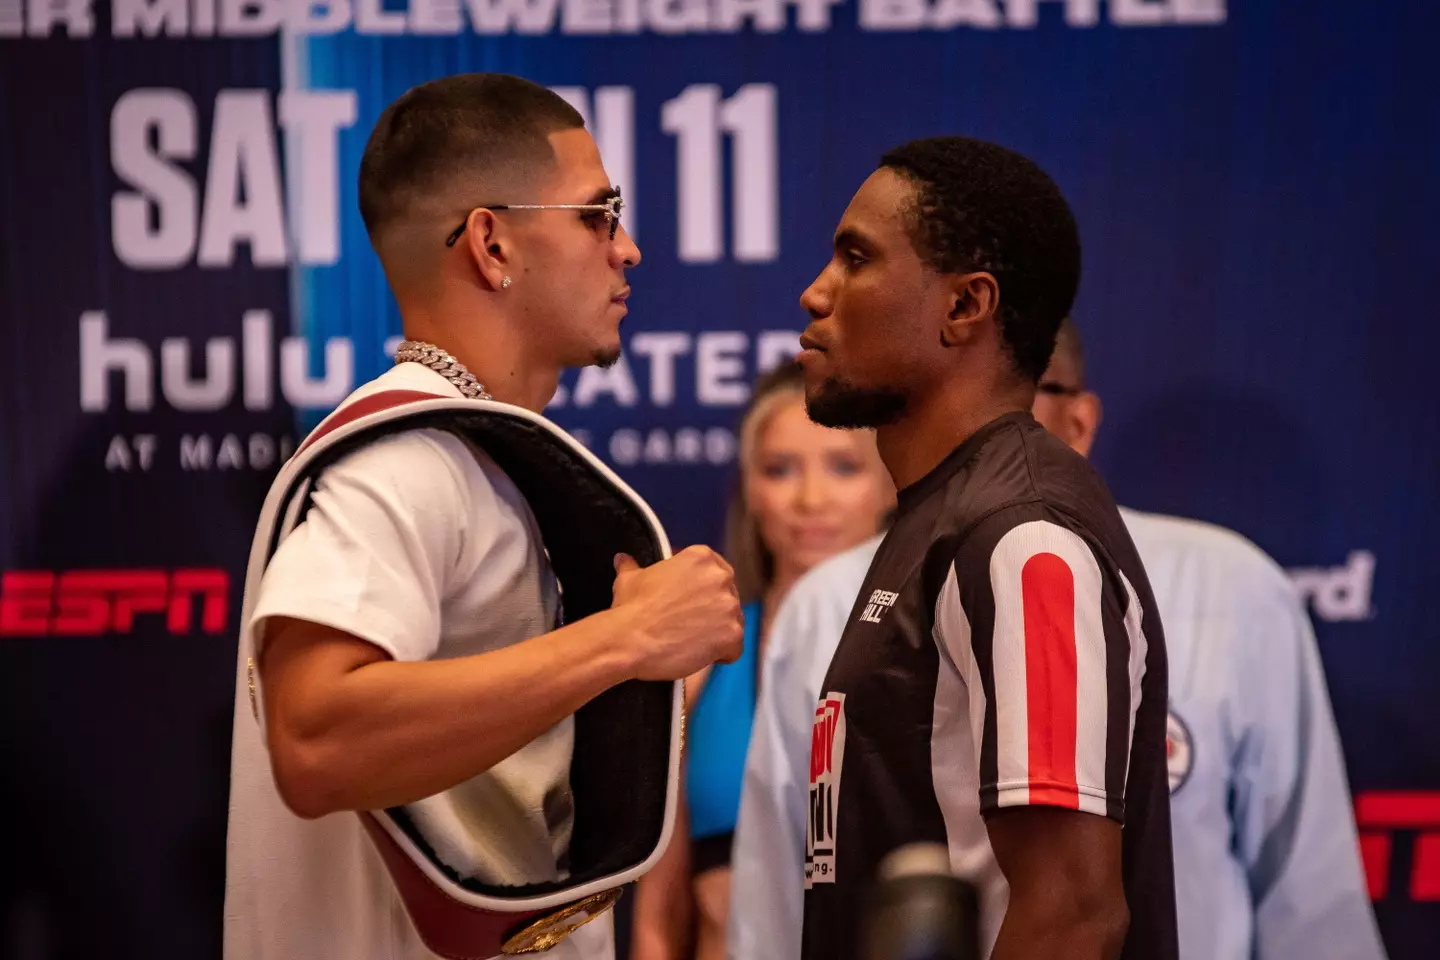 NABO Super Middleweight title holder Edgar Berlanga and opponent Roamer Alexis Angulo before their bout where Berlanga tried to bite his opponent's ear.